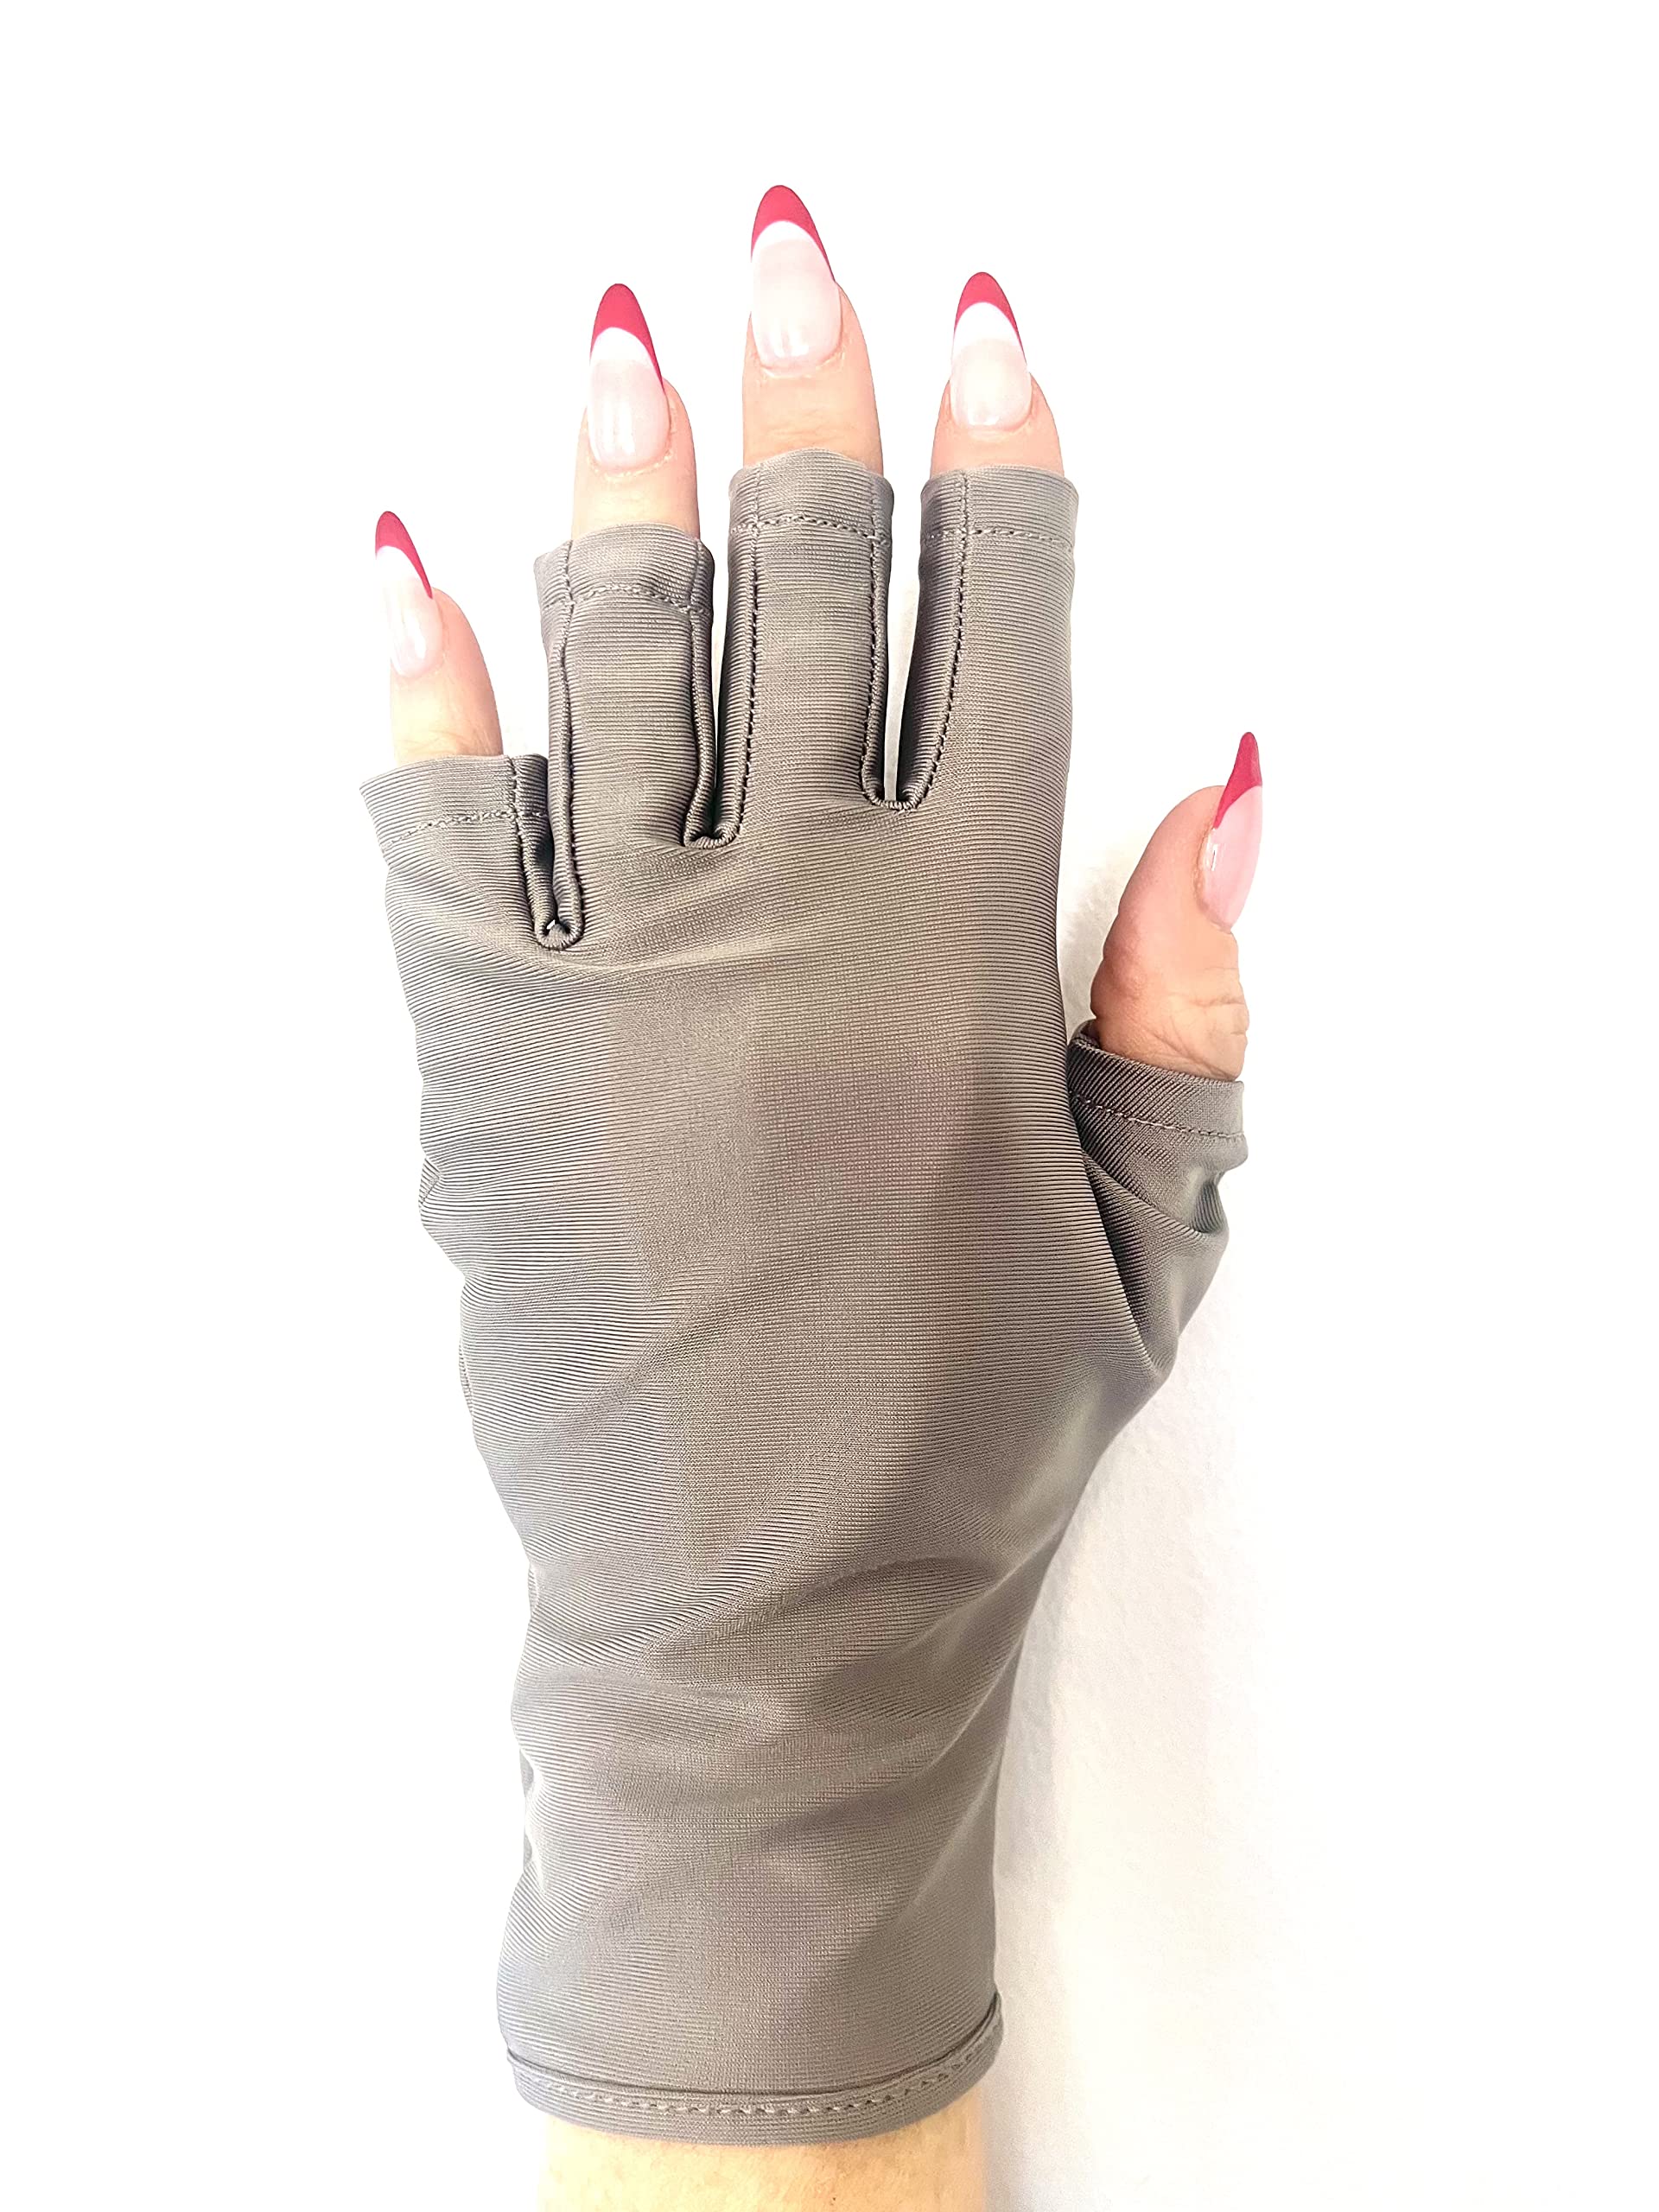 ManiGlovz -The ORIGINAL Anti UV/LED Gloves for Gel Manicures with